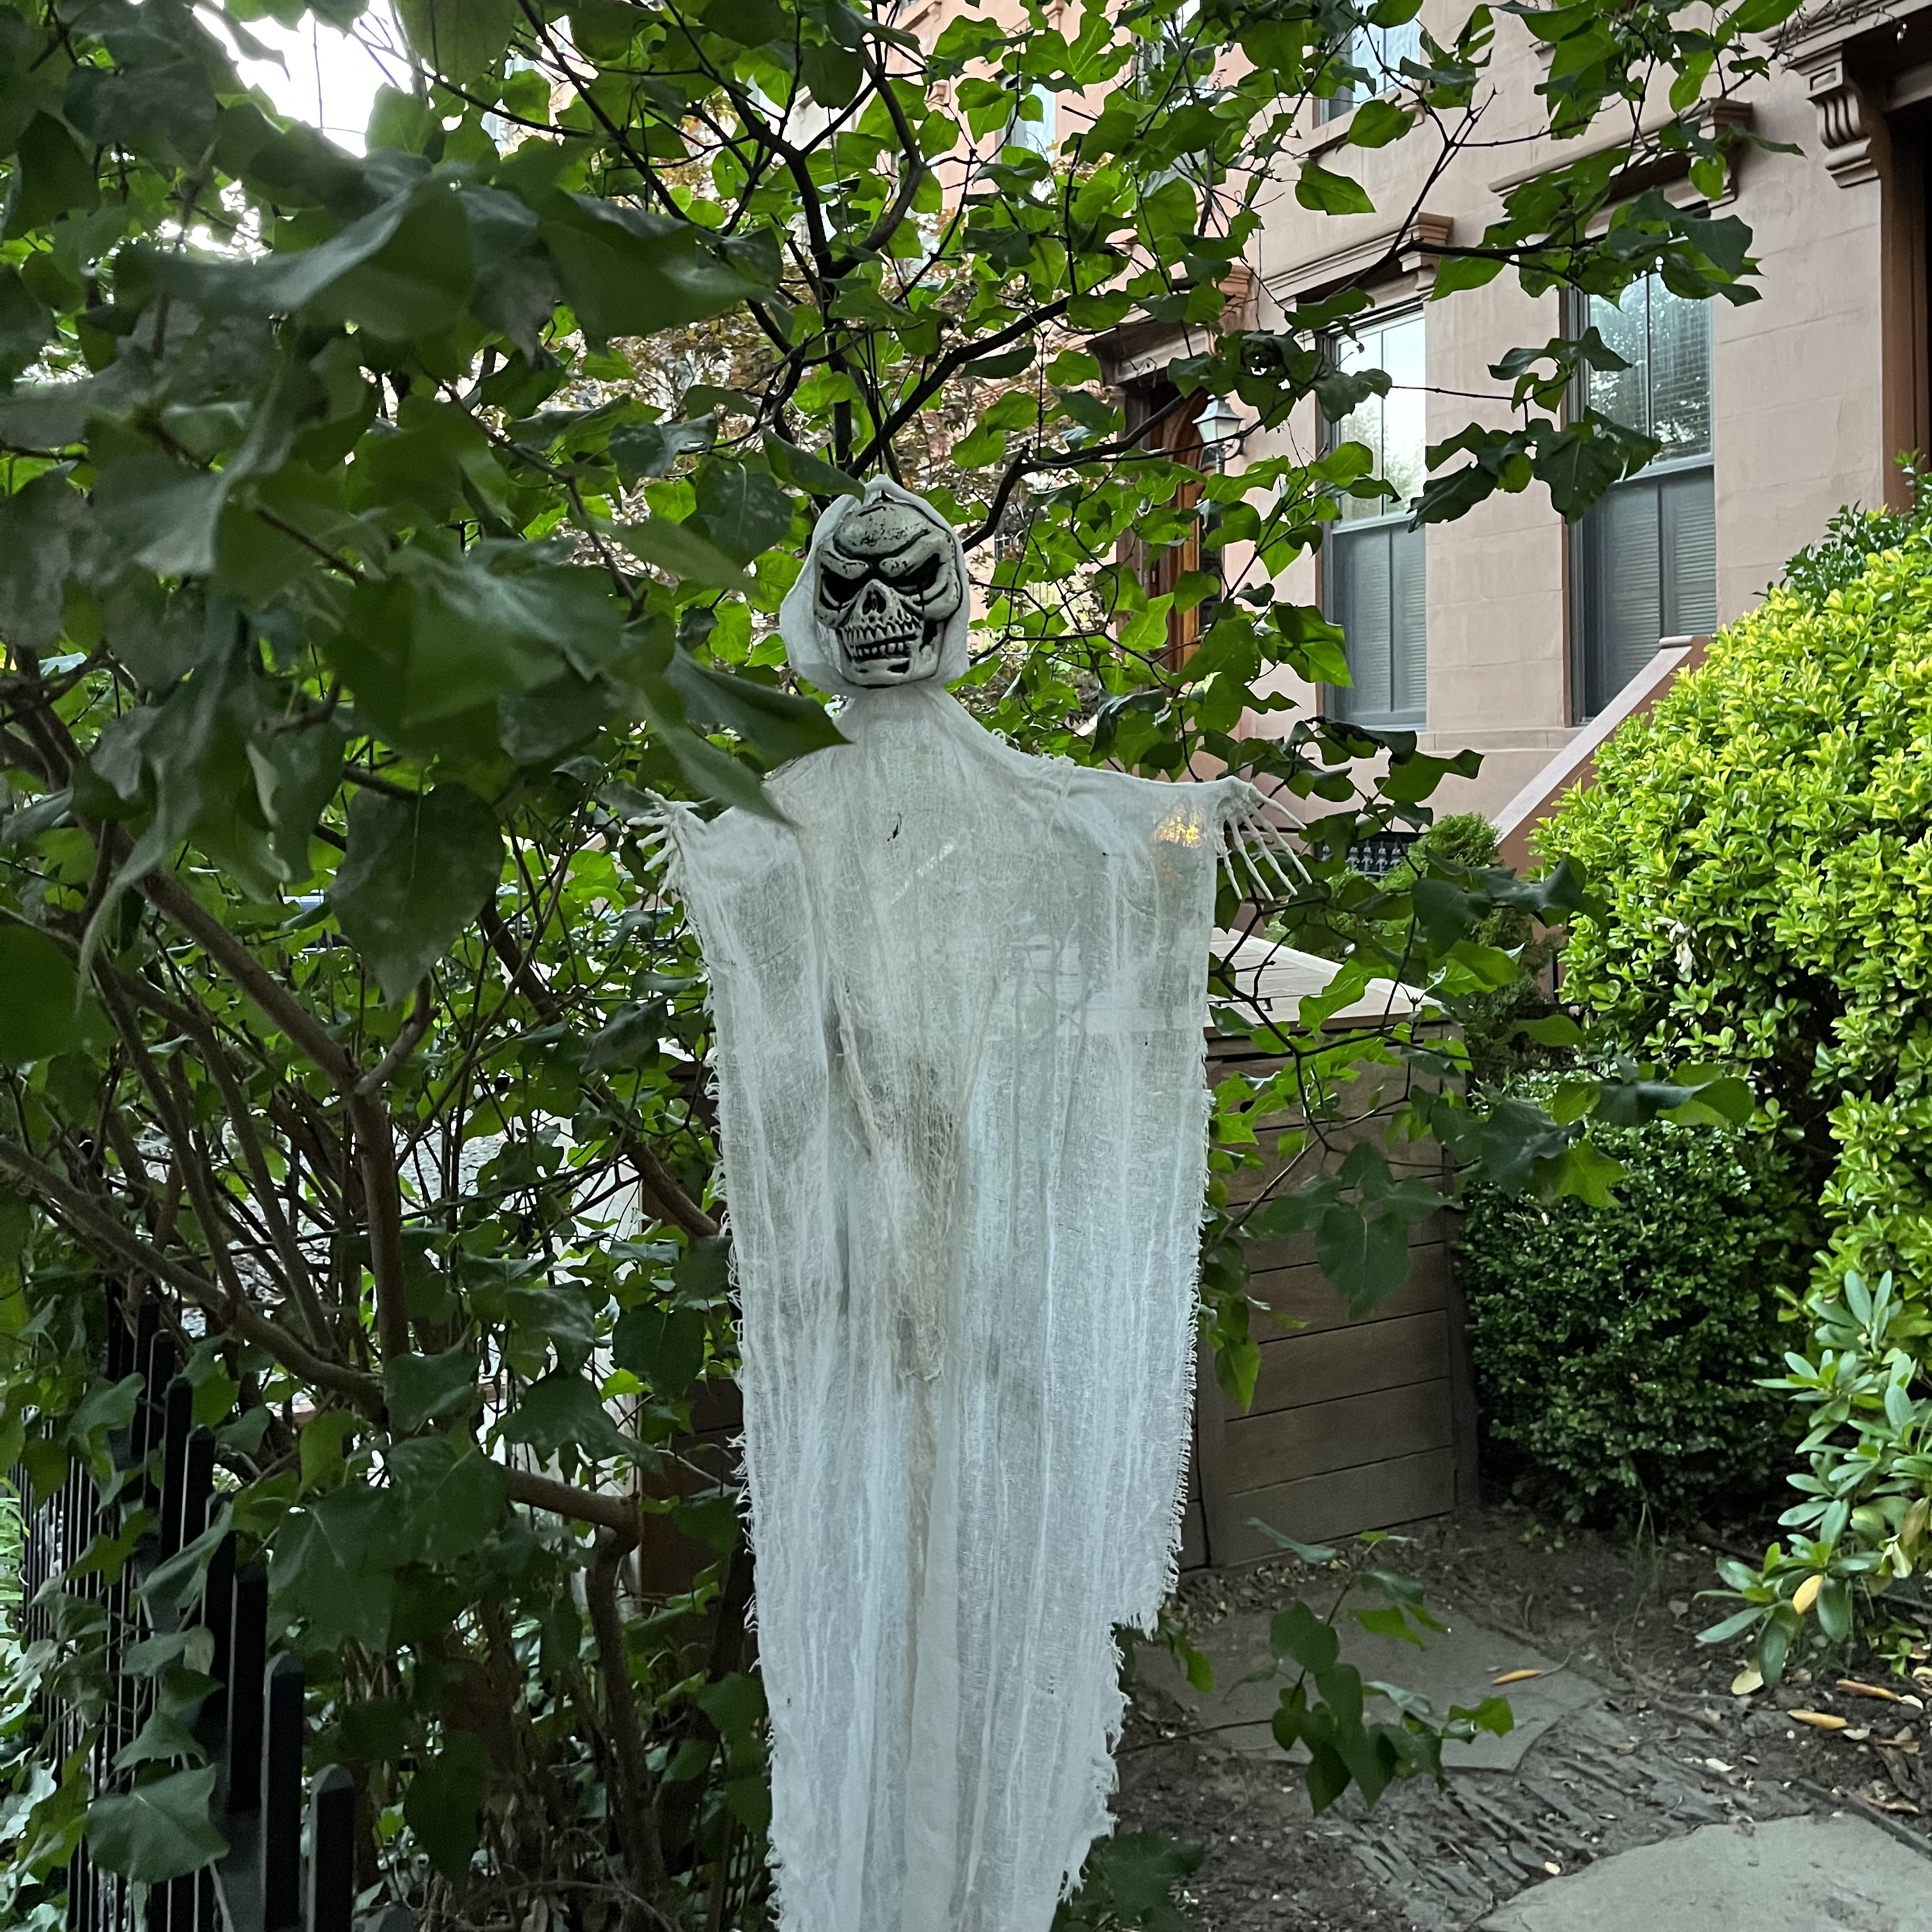 Getting kind of spooky. Park Place, Prospect Heights, Brooklyn.